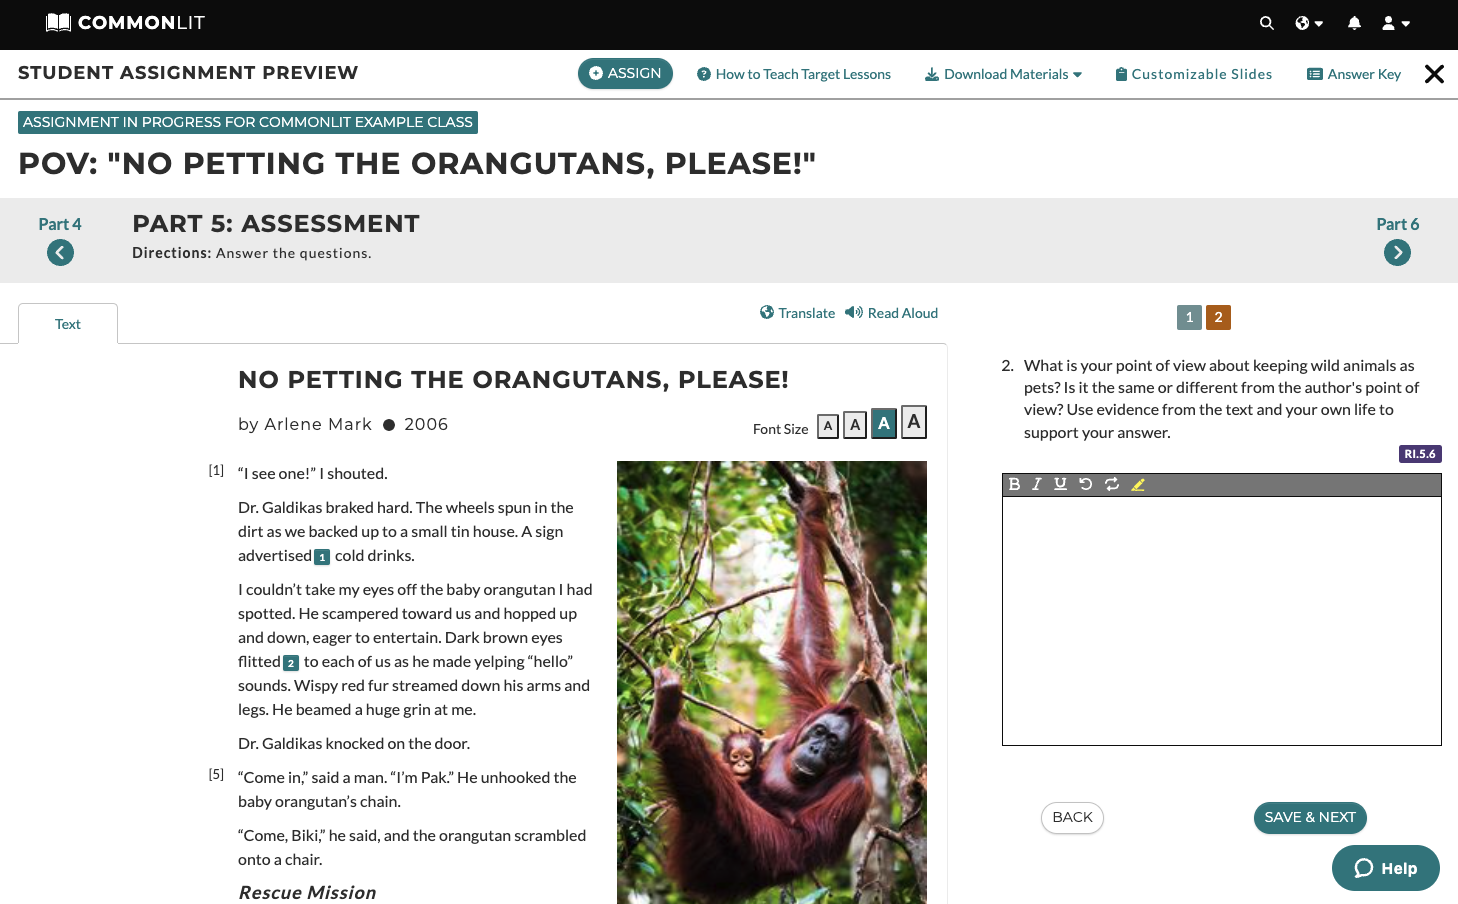 The text "No Petting the Orangutans, Please!" is on the left, and the final assessment question is on the right.